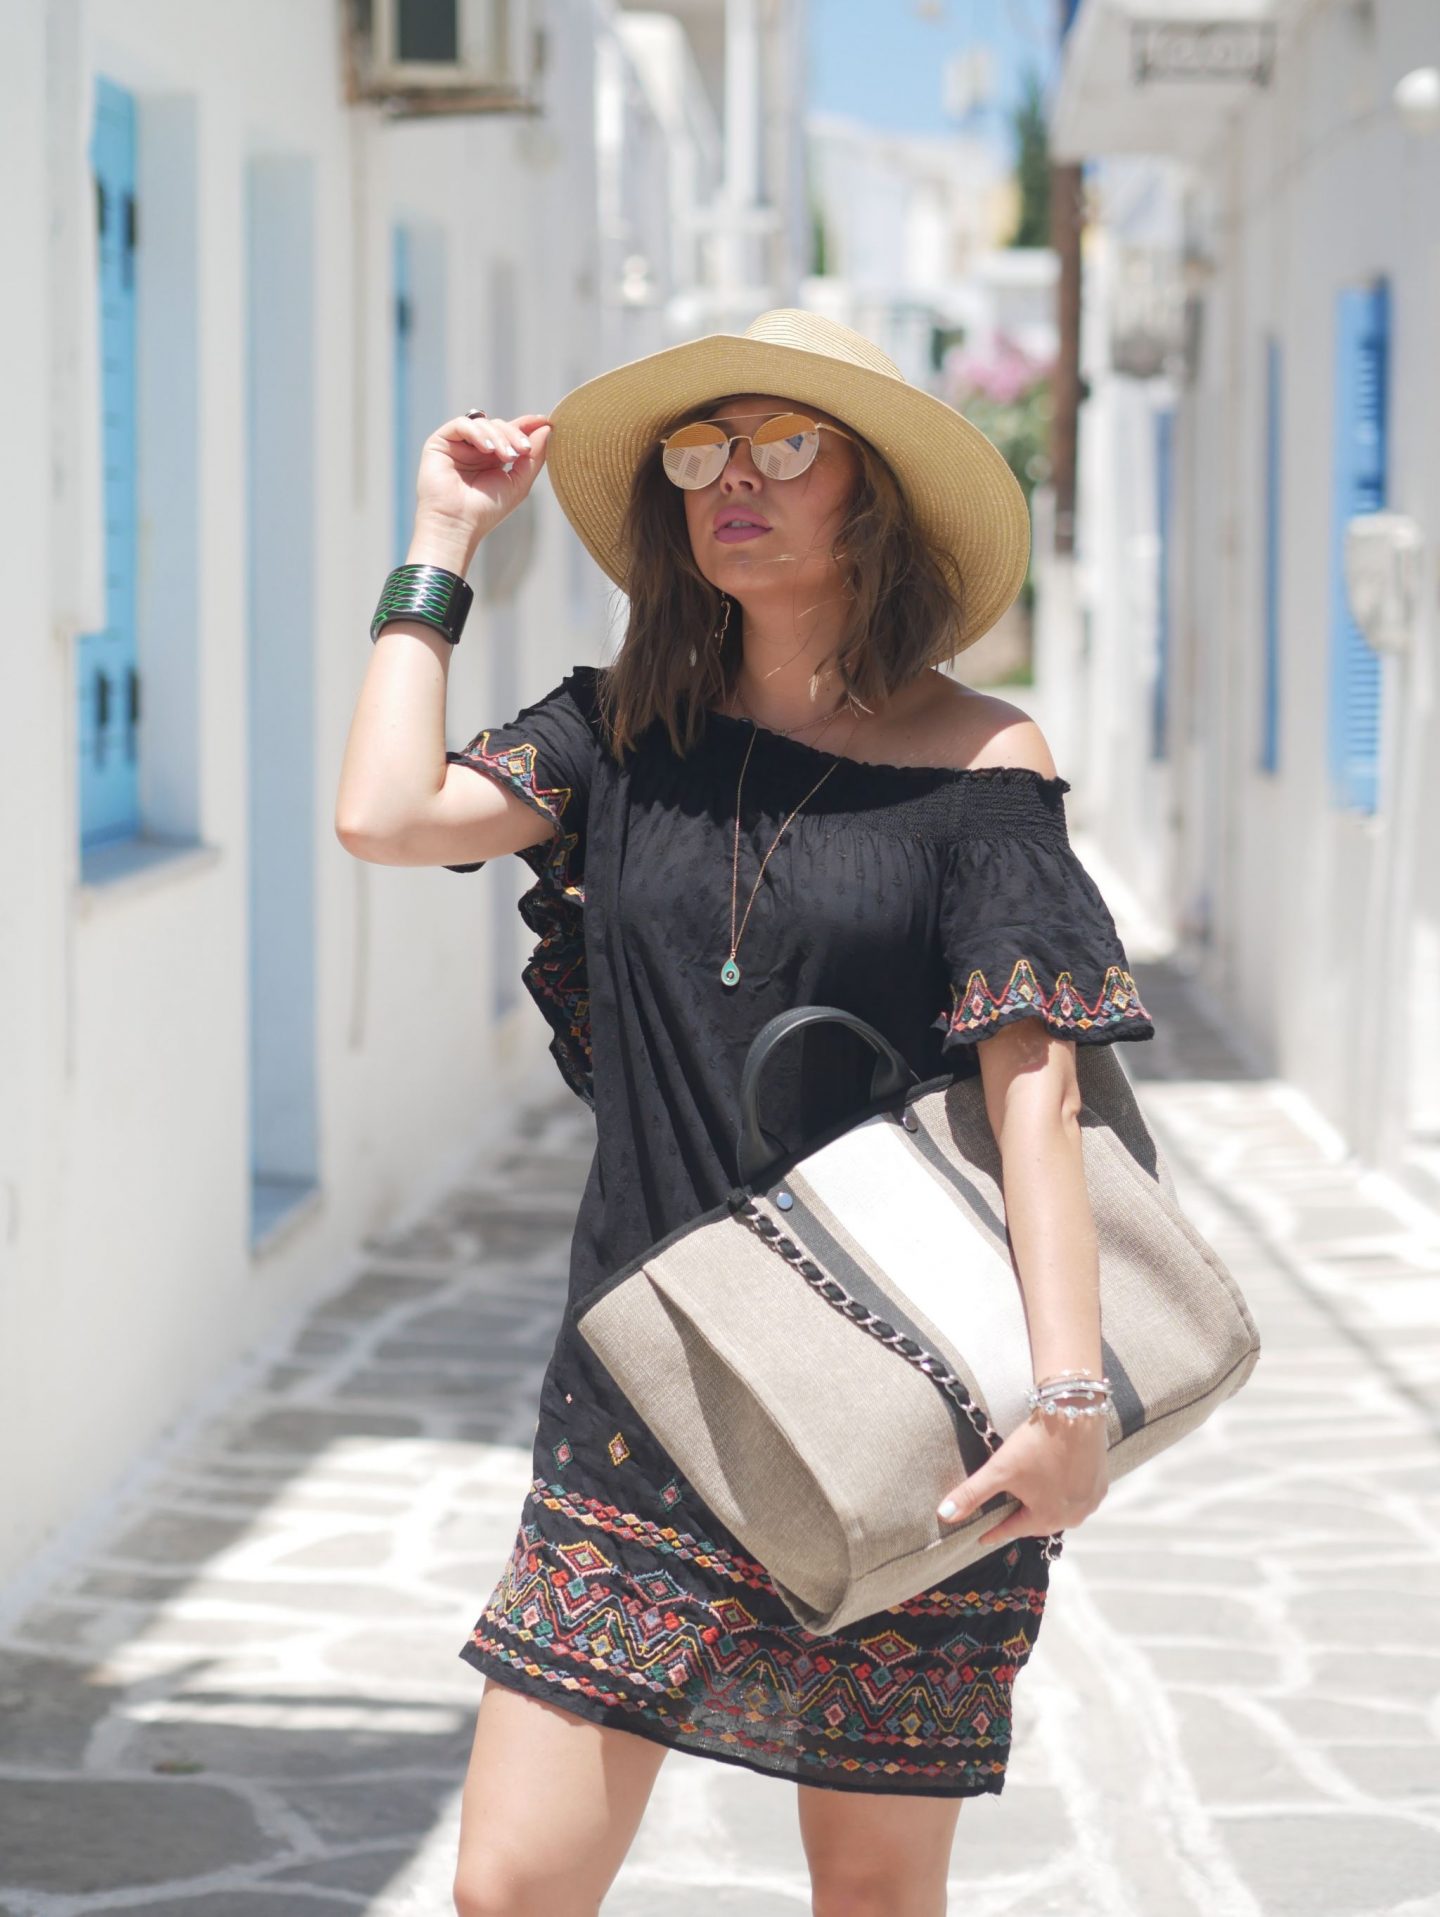 manchester fashion blogger, manchester fashion , Mykonos , Greece , Travel guide to Mykonos, Travel guide 